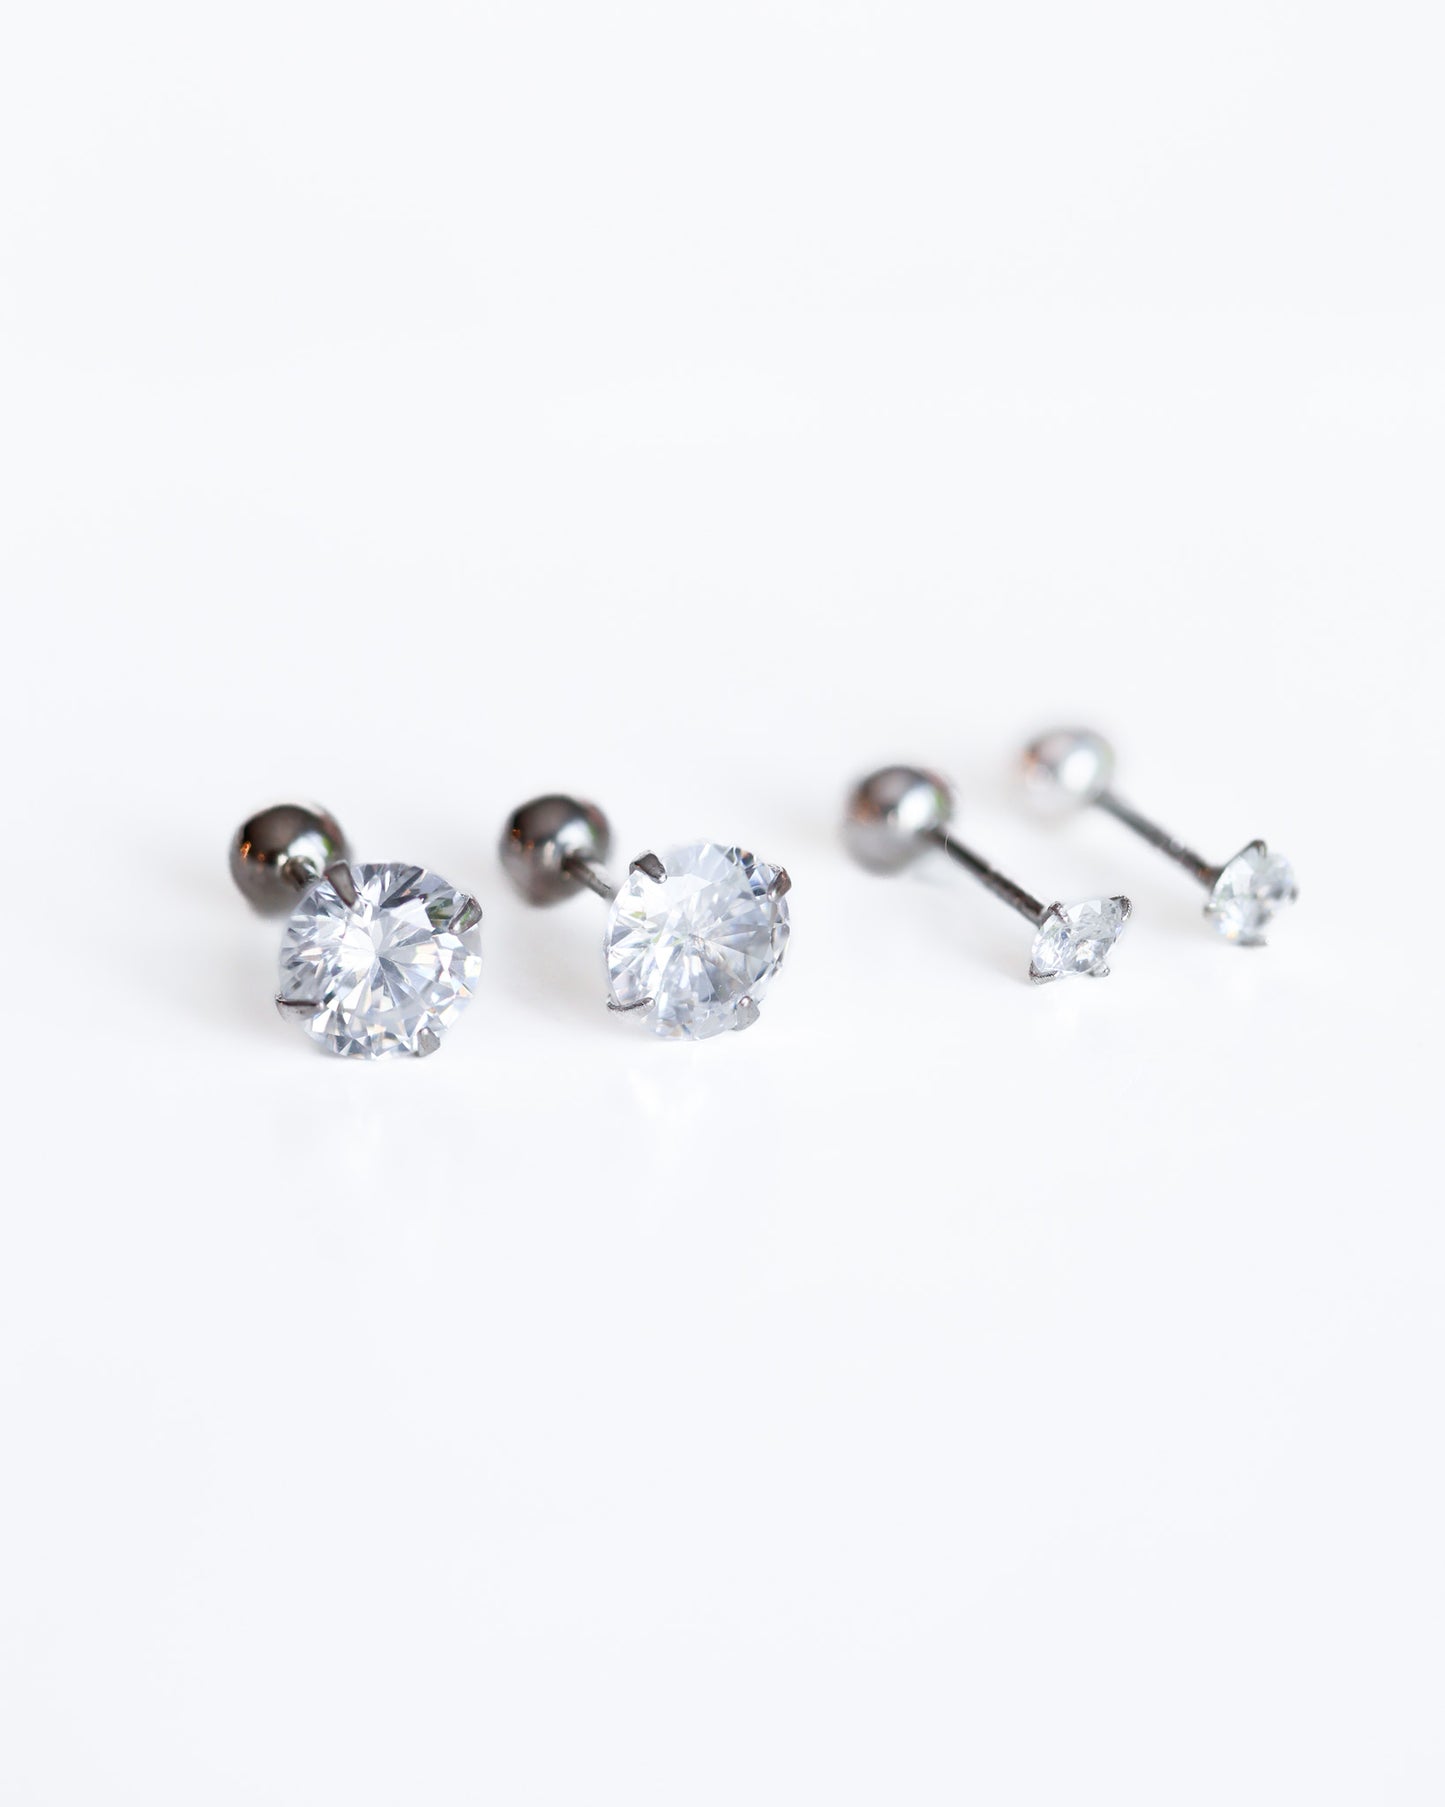 Stud Earrings with Cubic Zirconia in Sterling Silver with Screw ball backs